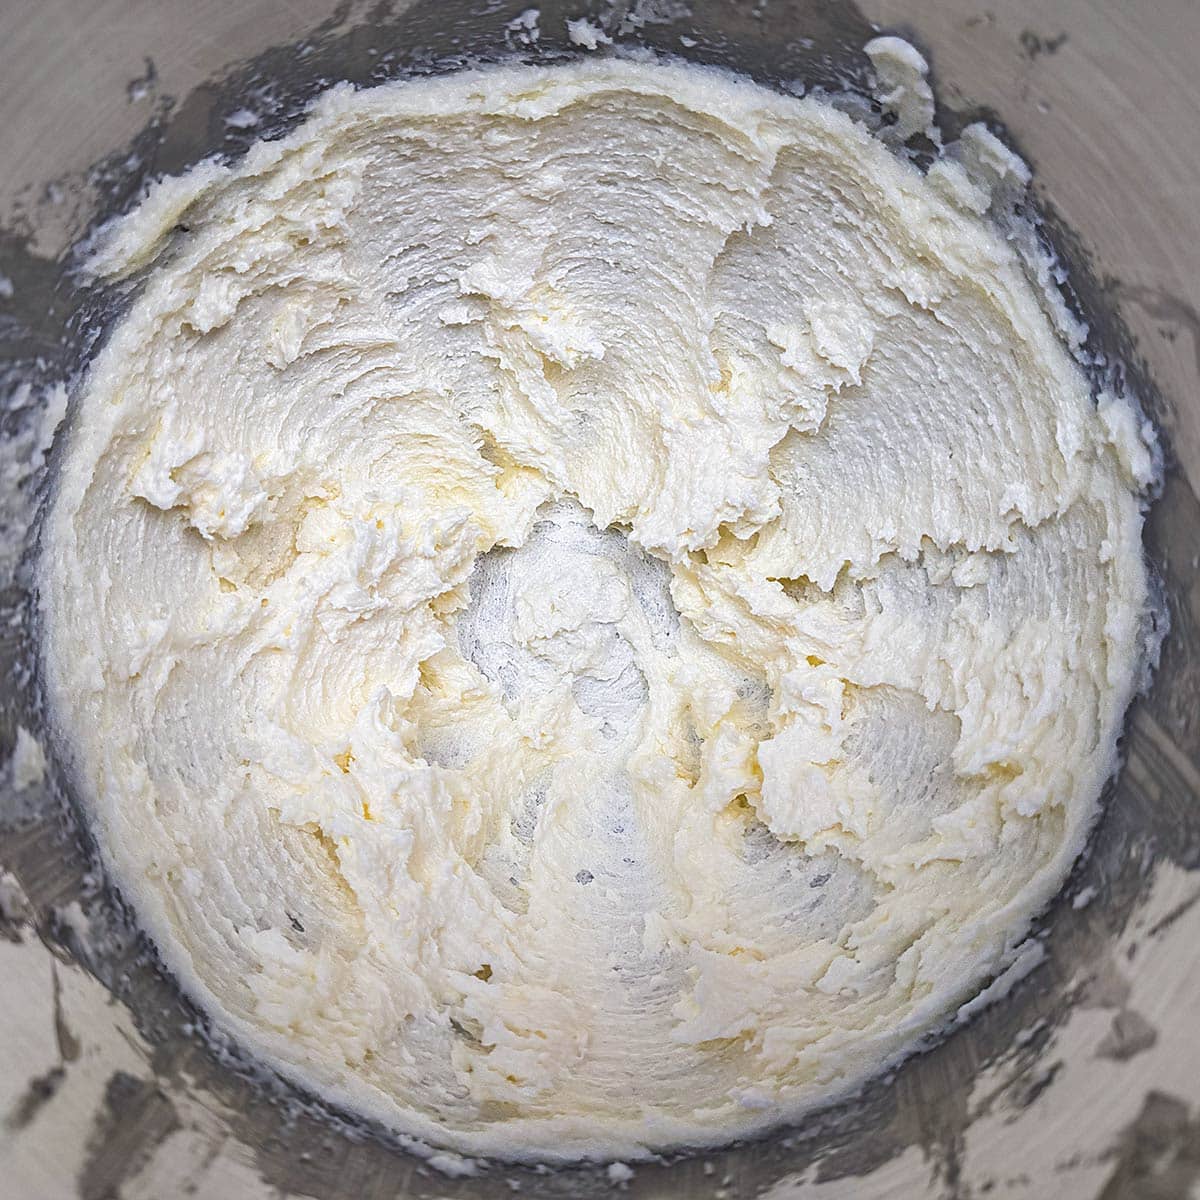 Creaming the butter in a mixer.